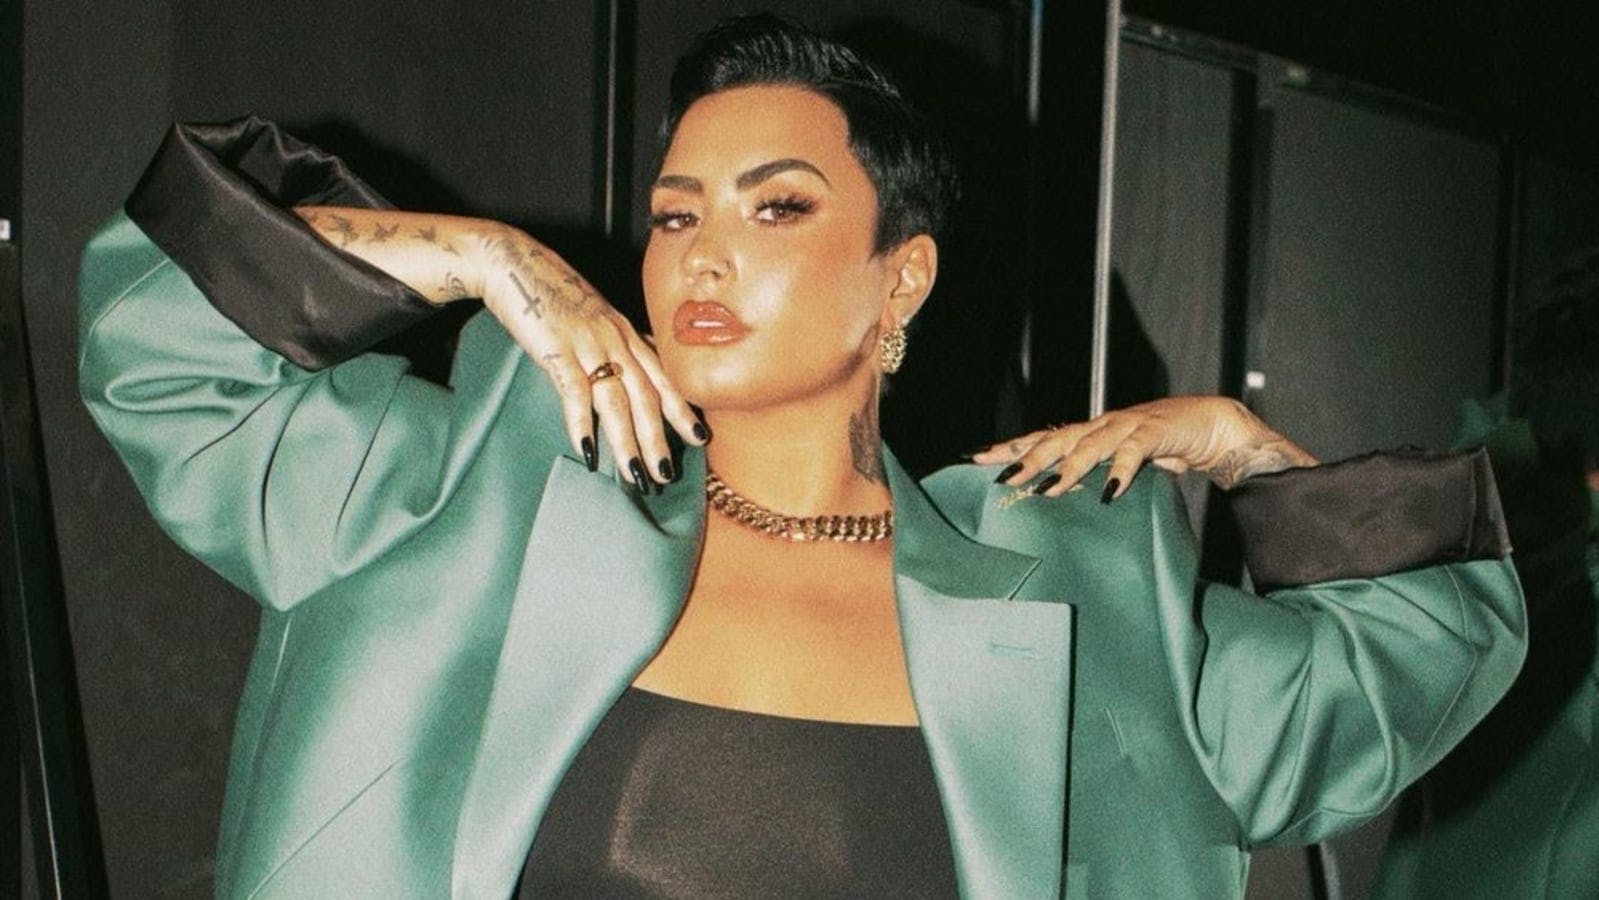 Demi Lovato poses with her arms up, in a green satin suit jacket.